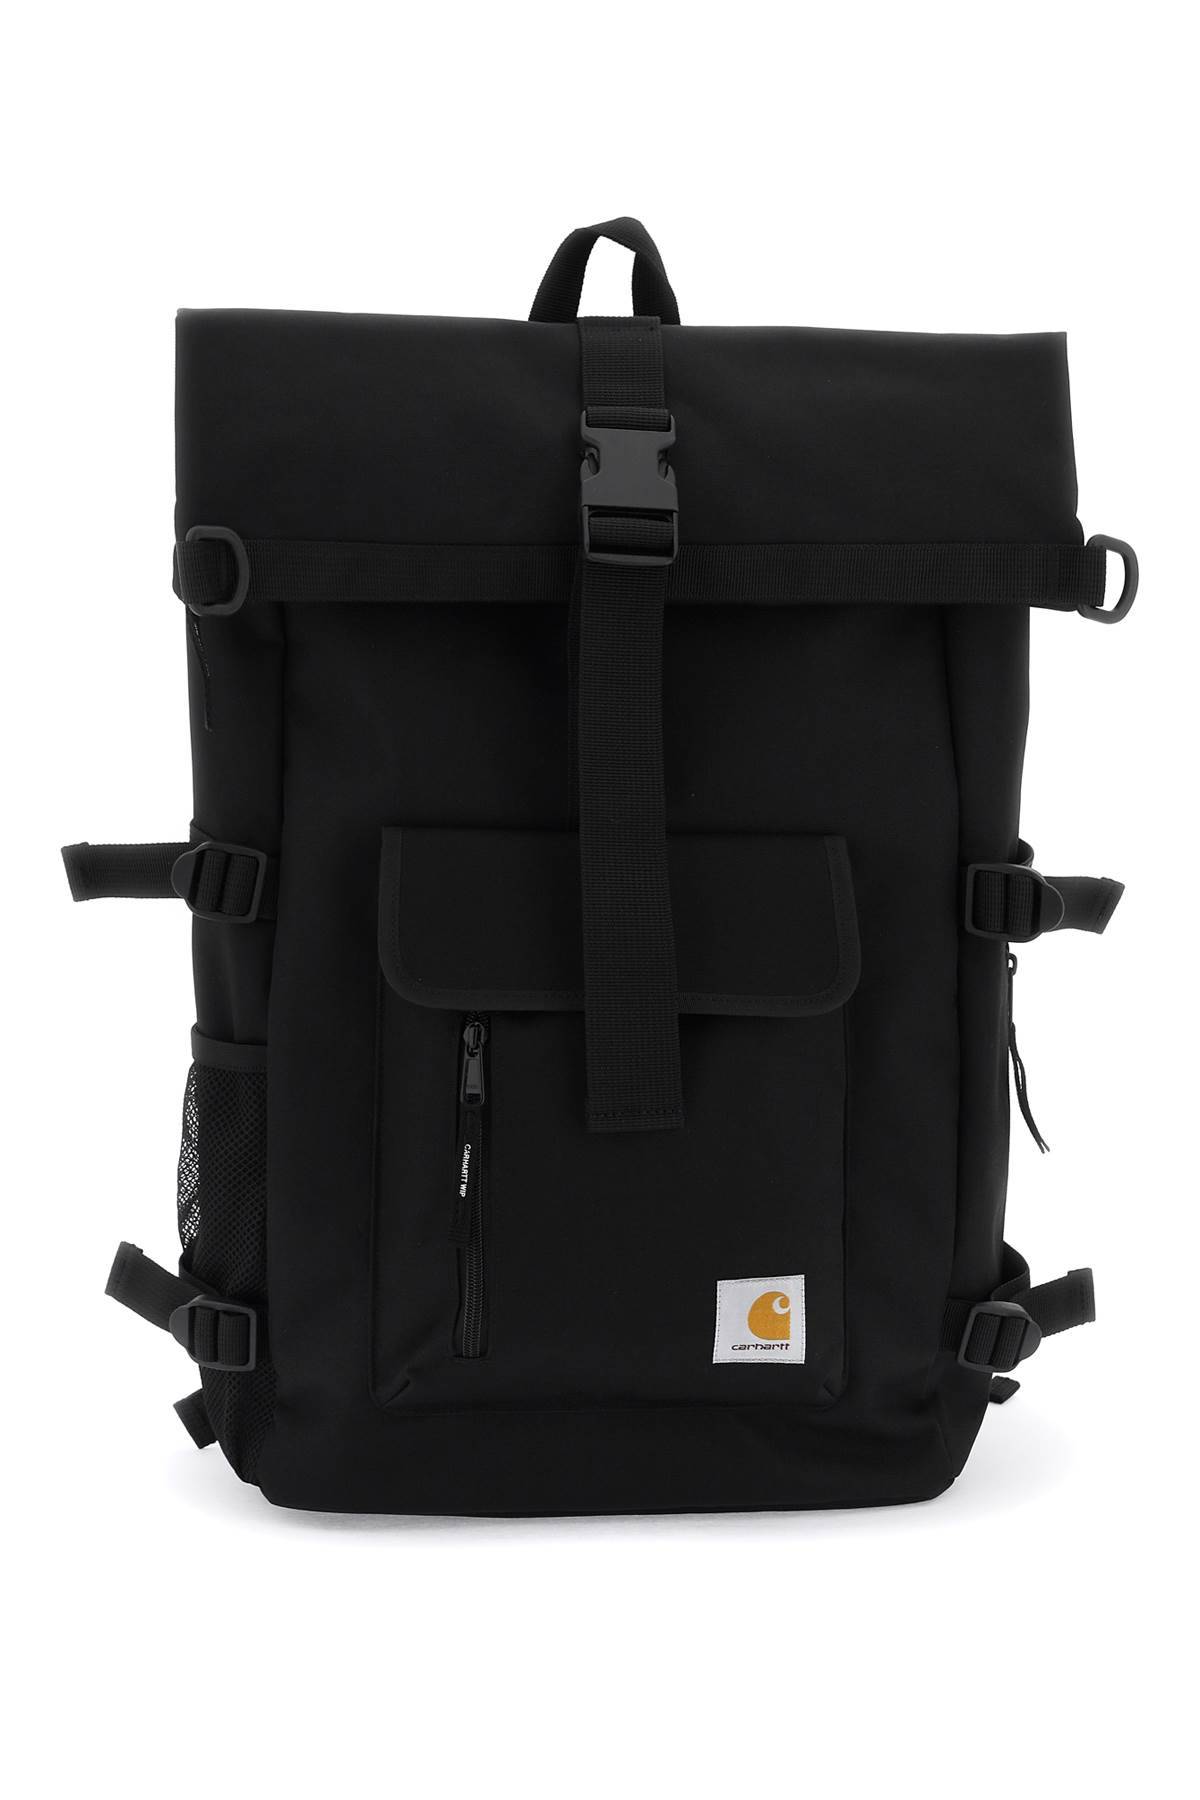 Carhartt WIP CARHARTT WIP "phillis recycled technical canvas backpack